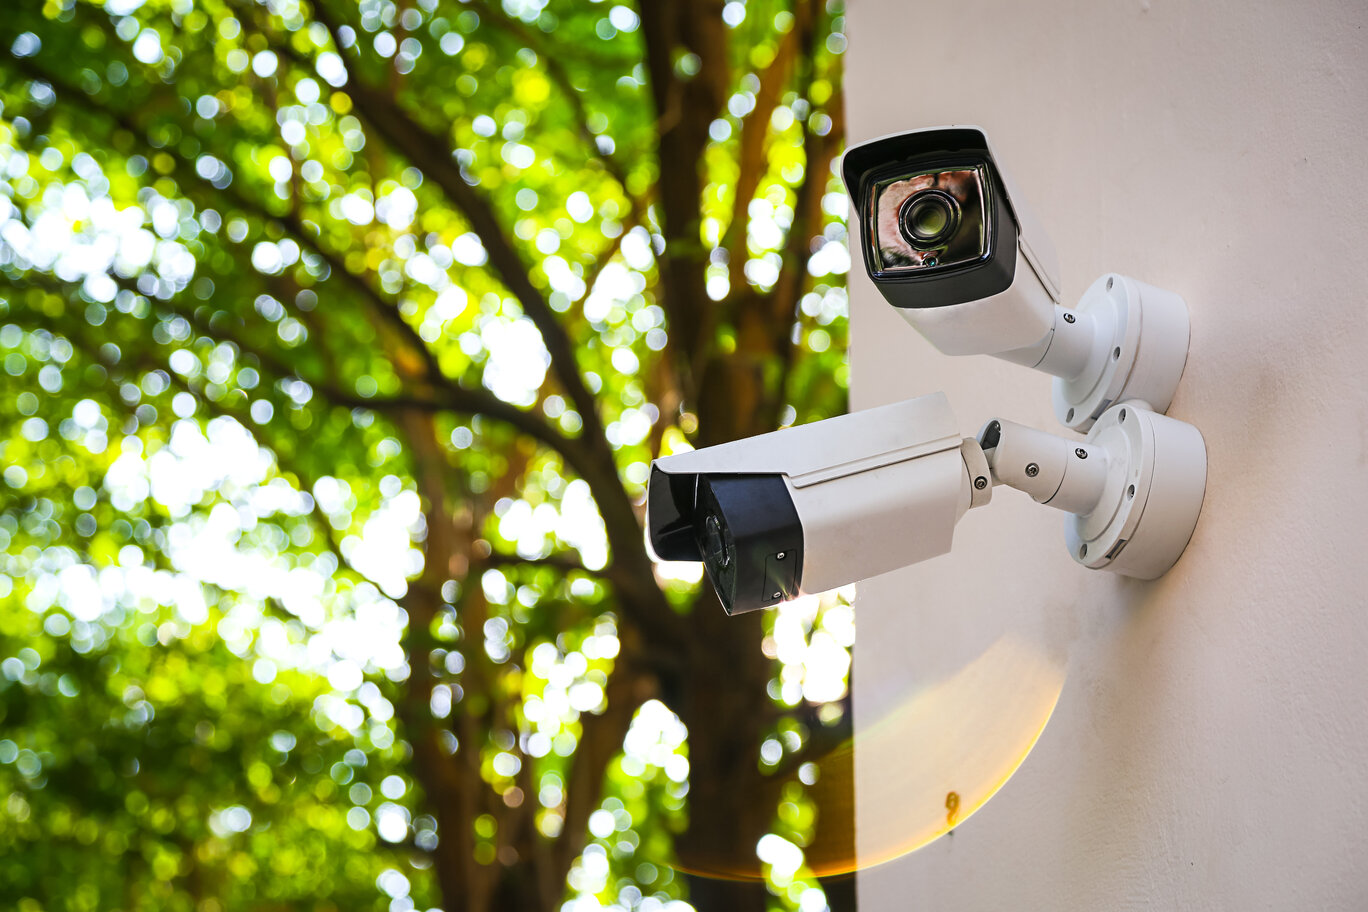 This will make you never want to use a home security camera again